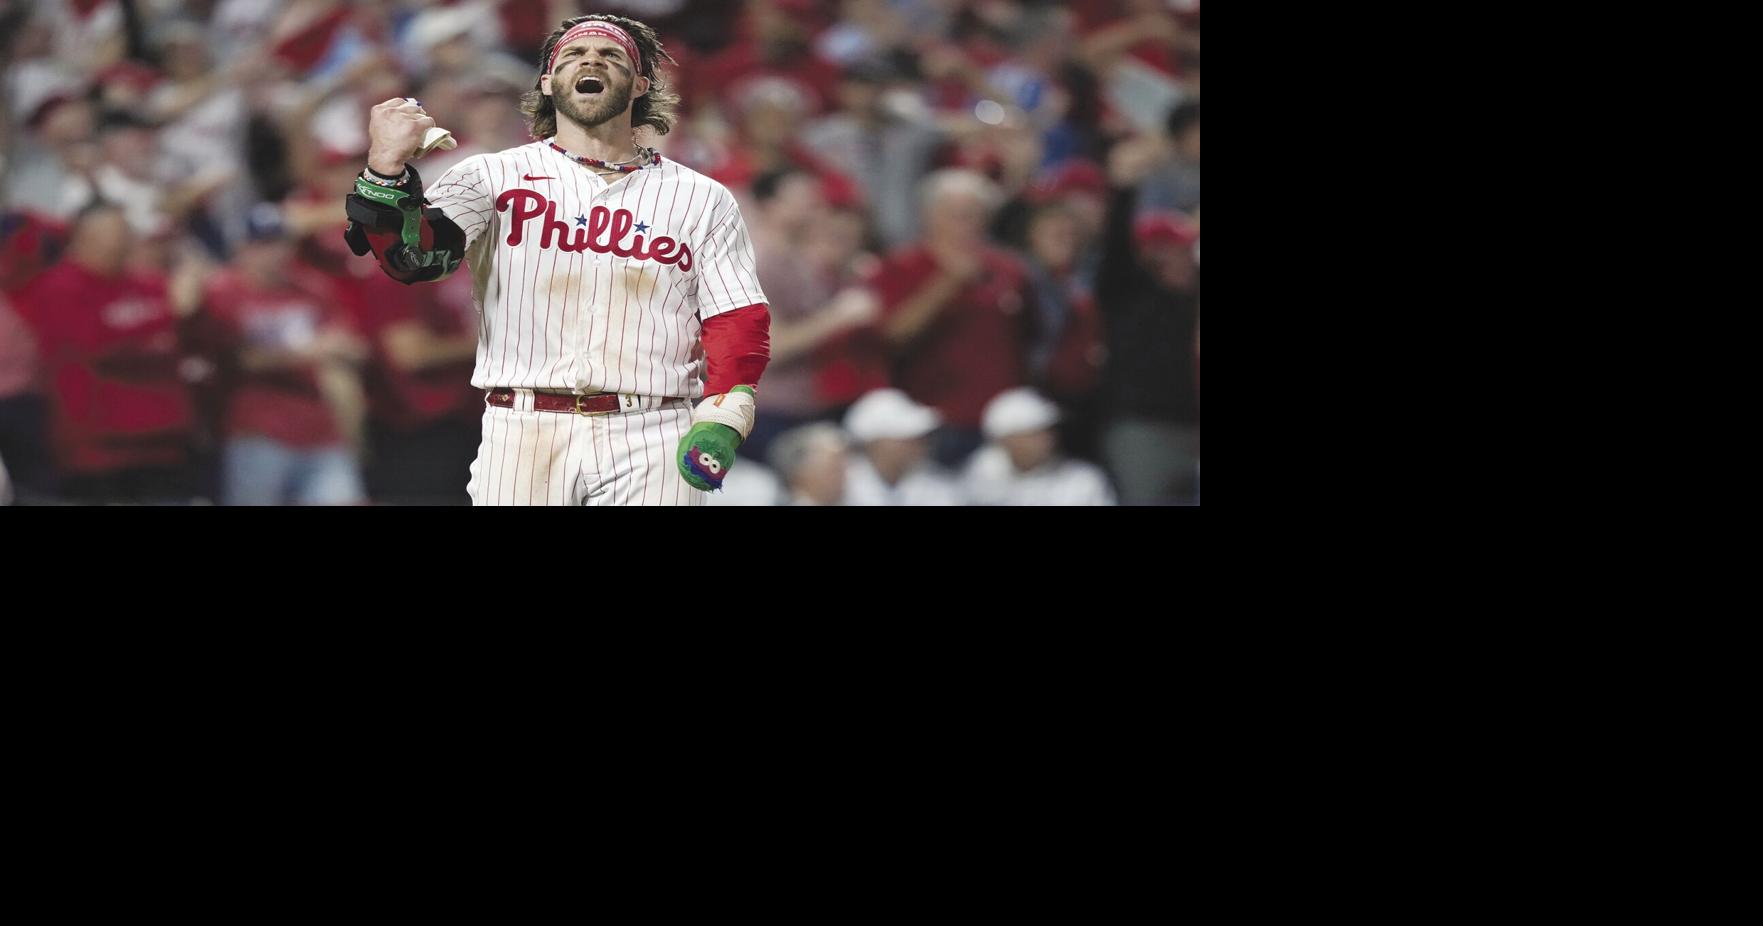 Philles, Werth get rings, then rally for win